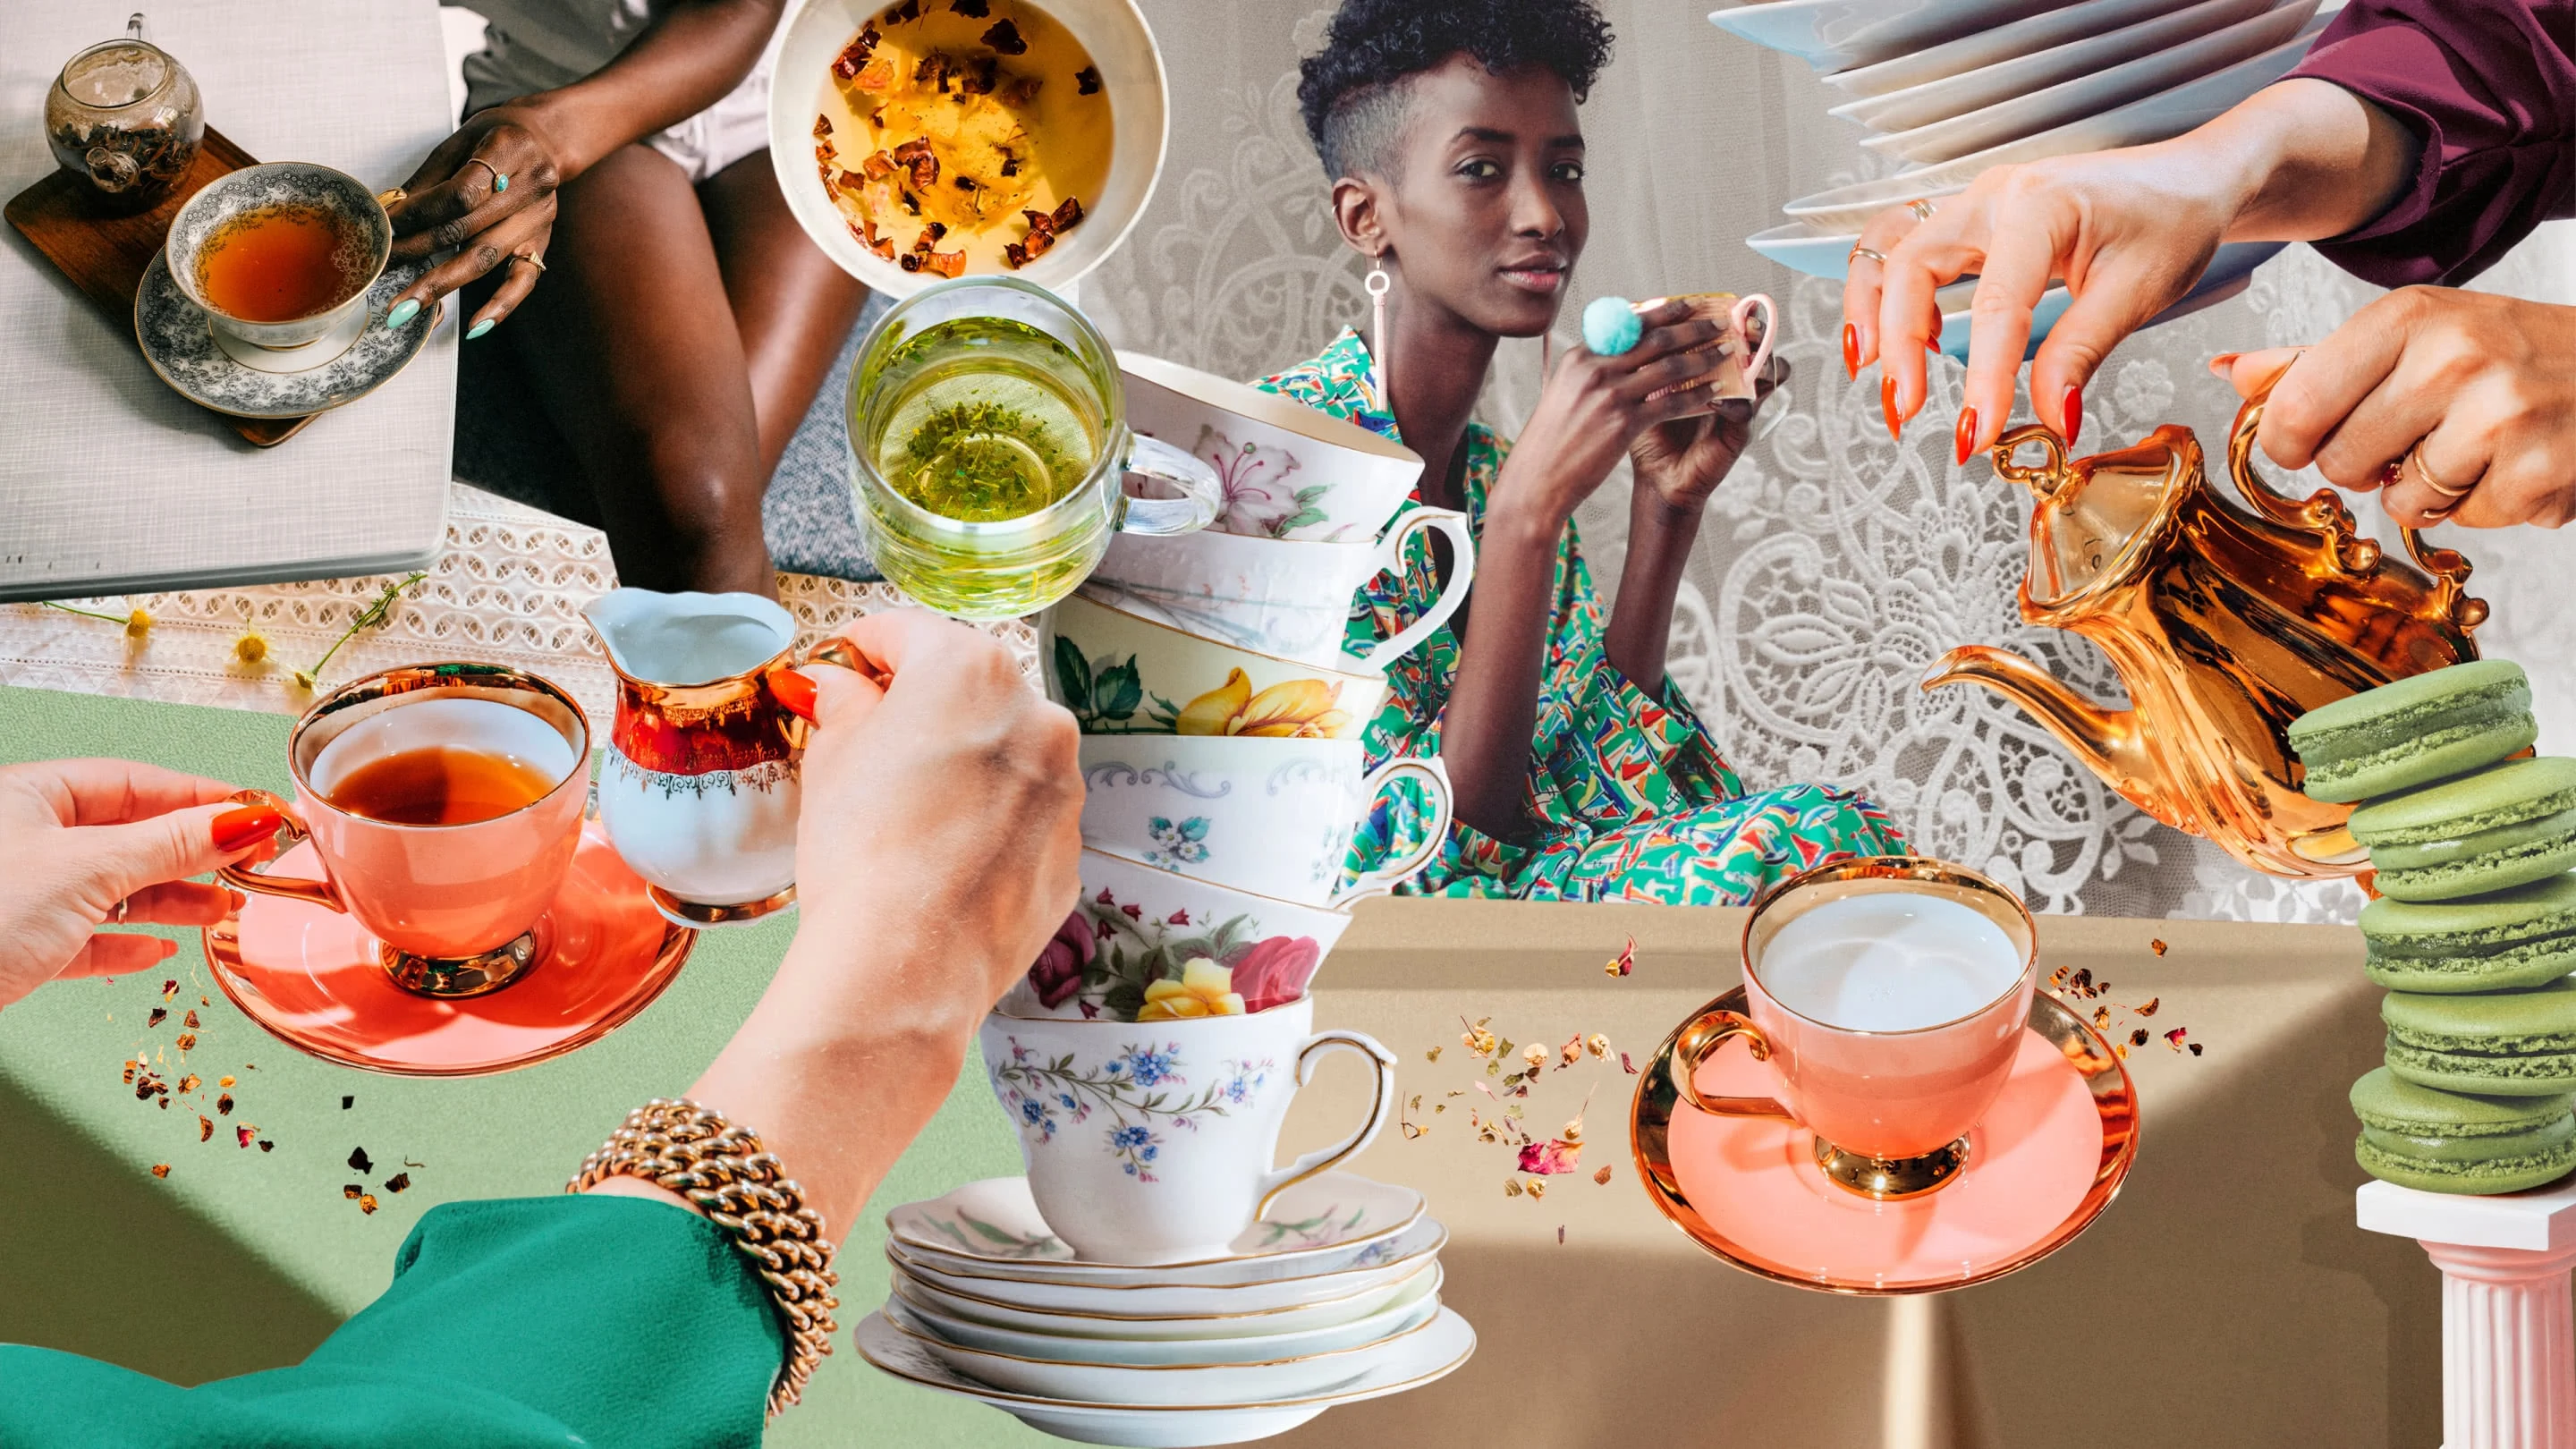 Colourful collage with stacked antique tea cups, plates and green macarons, with various hands, positioned with milk jugs and teapots above cups of amber tea, and a Black woman in green in the centre, looking at the camera and holding a gold cup.